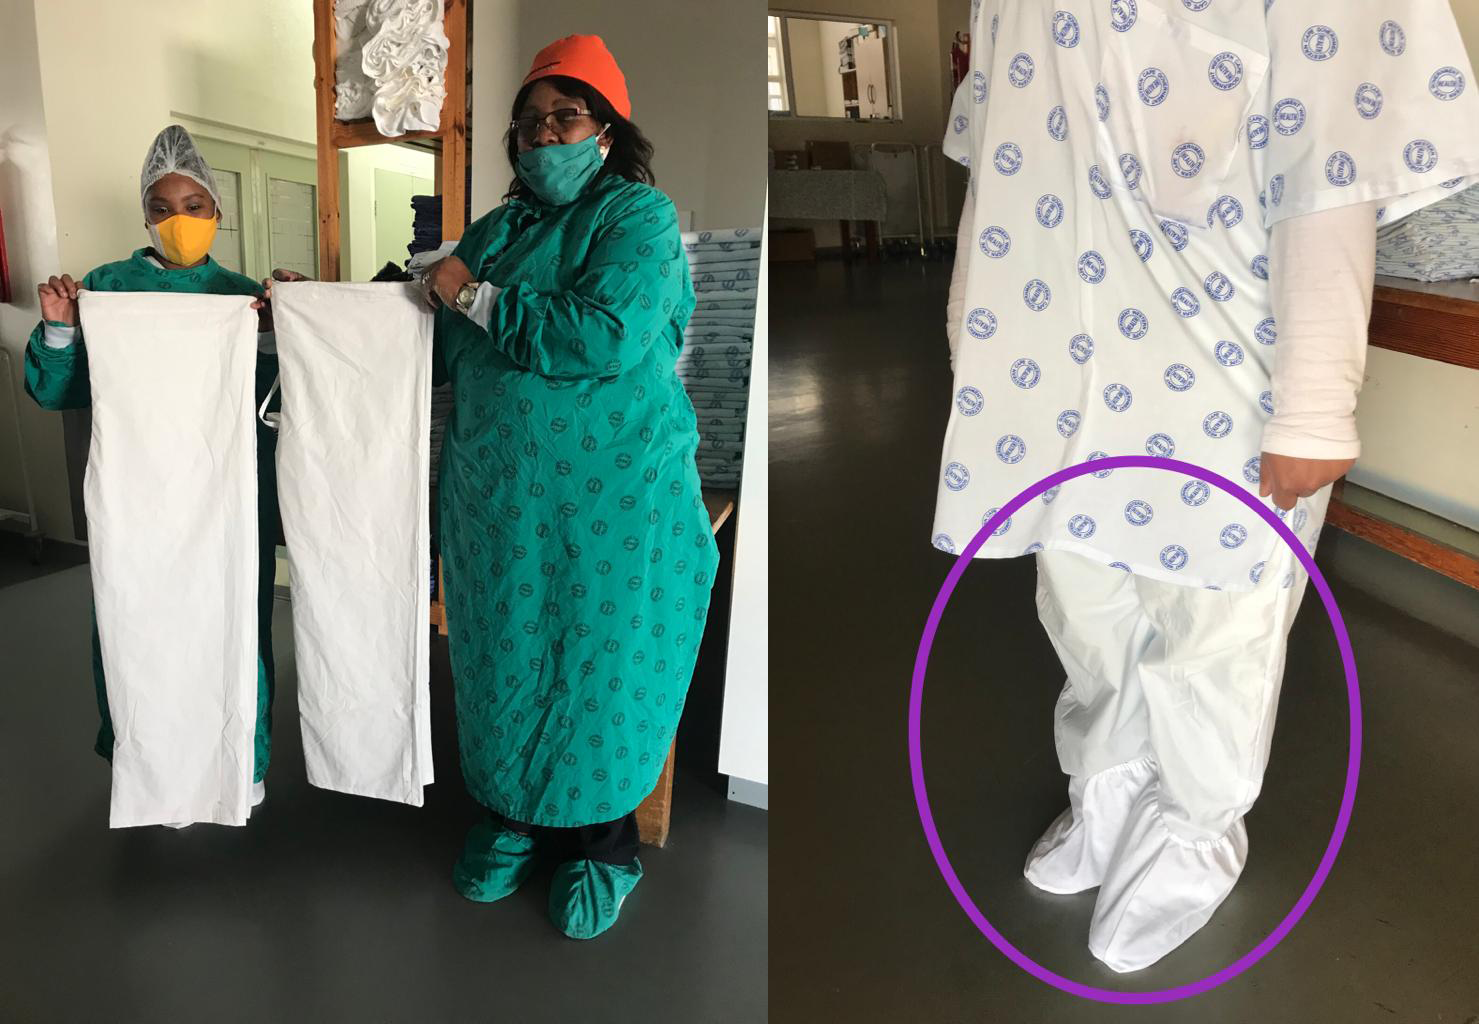 Donation of linen from Fancourt used for personal protective clothing for hospital staff and #masks4george